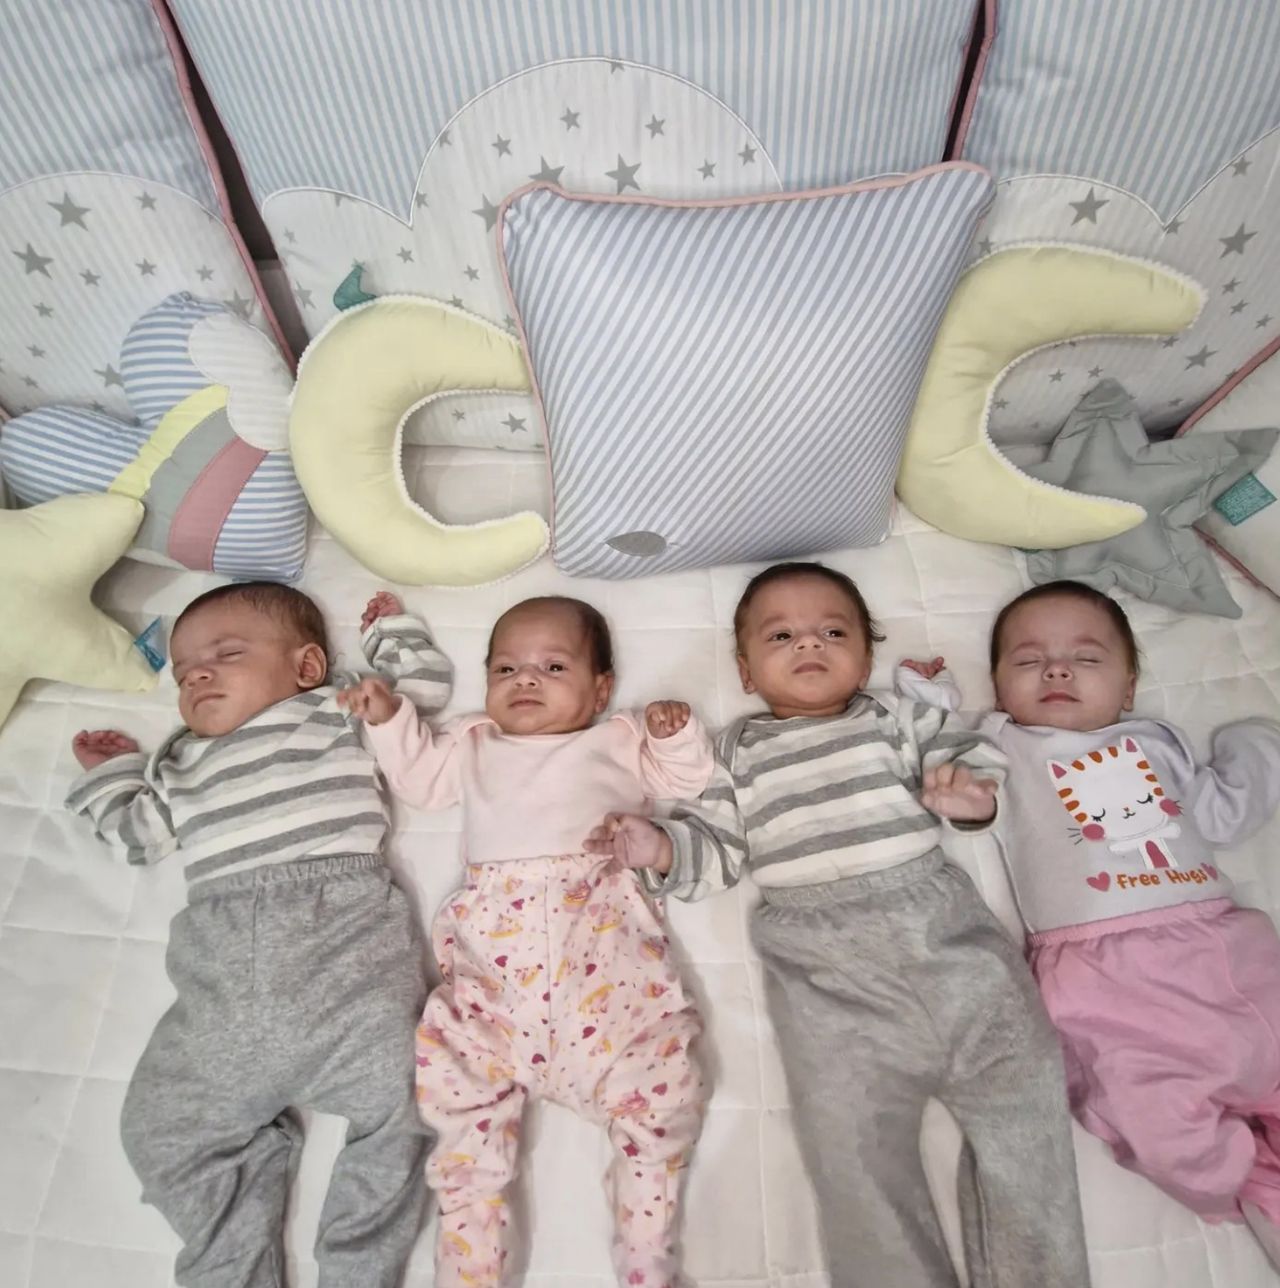 A woman gave birth to sextuplets.